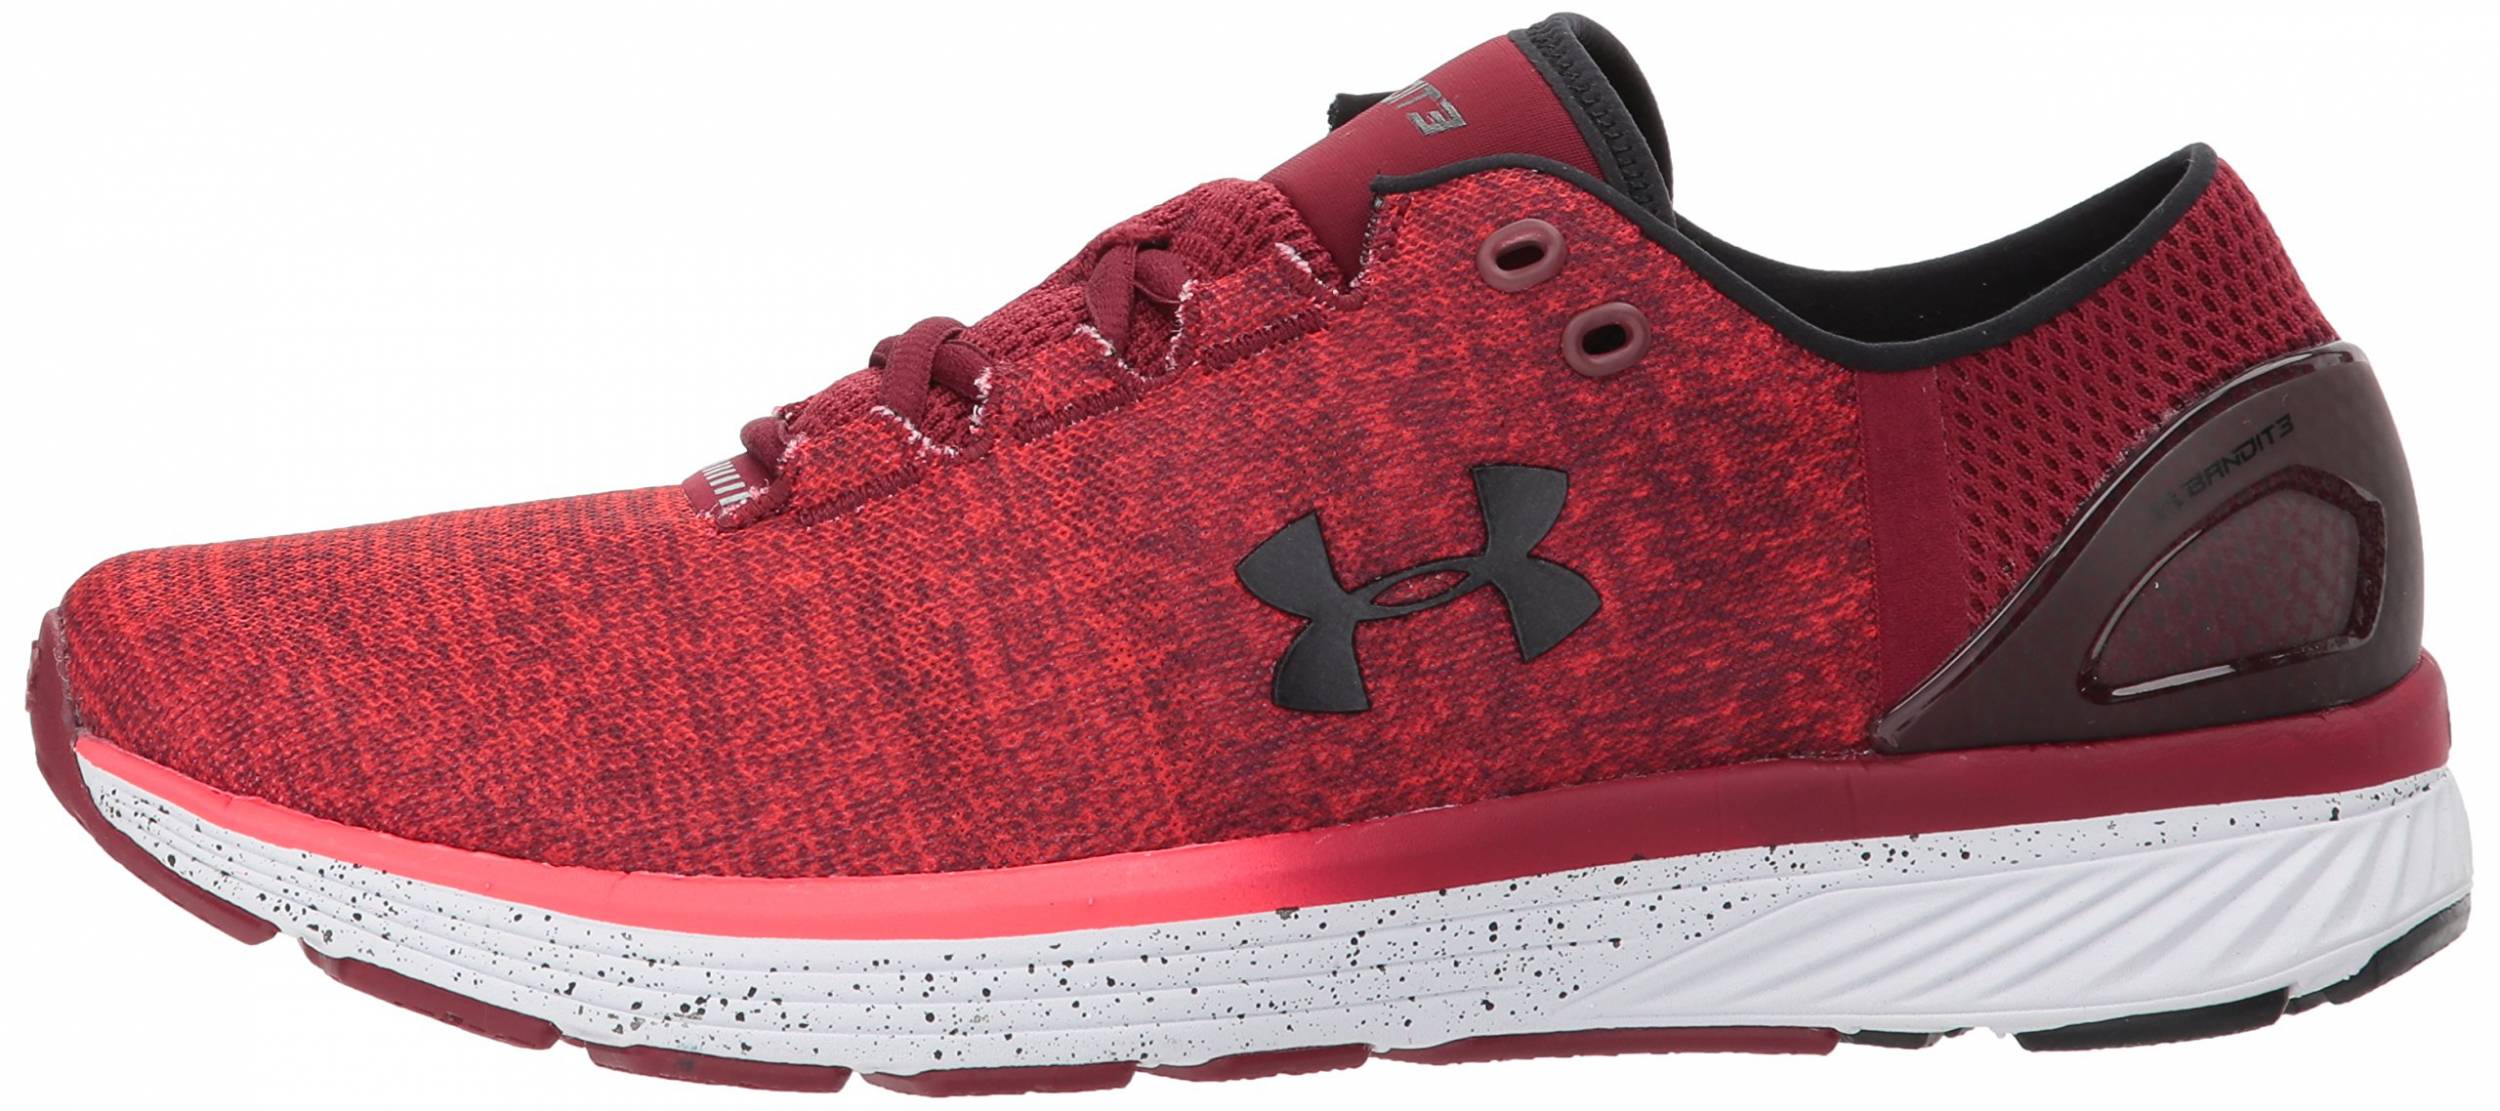 red under armour running shoes